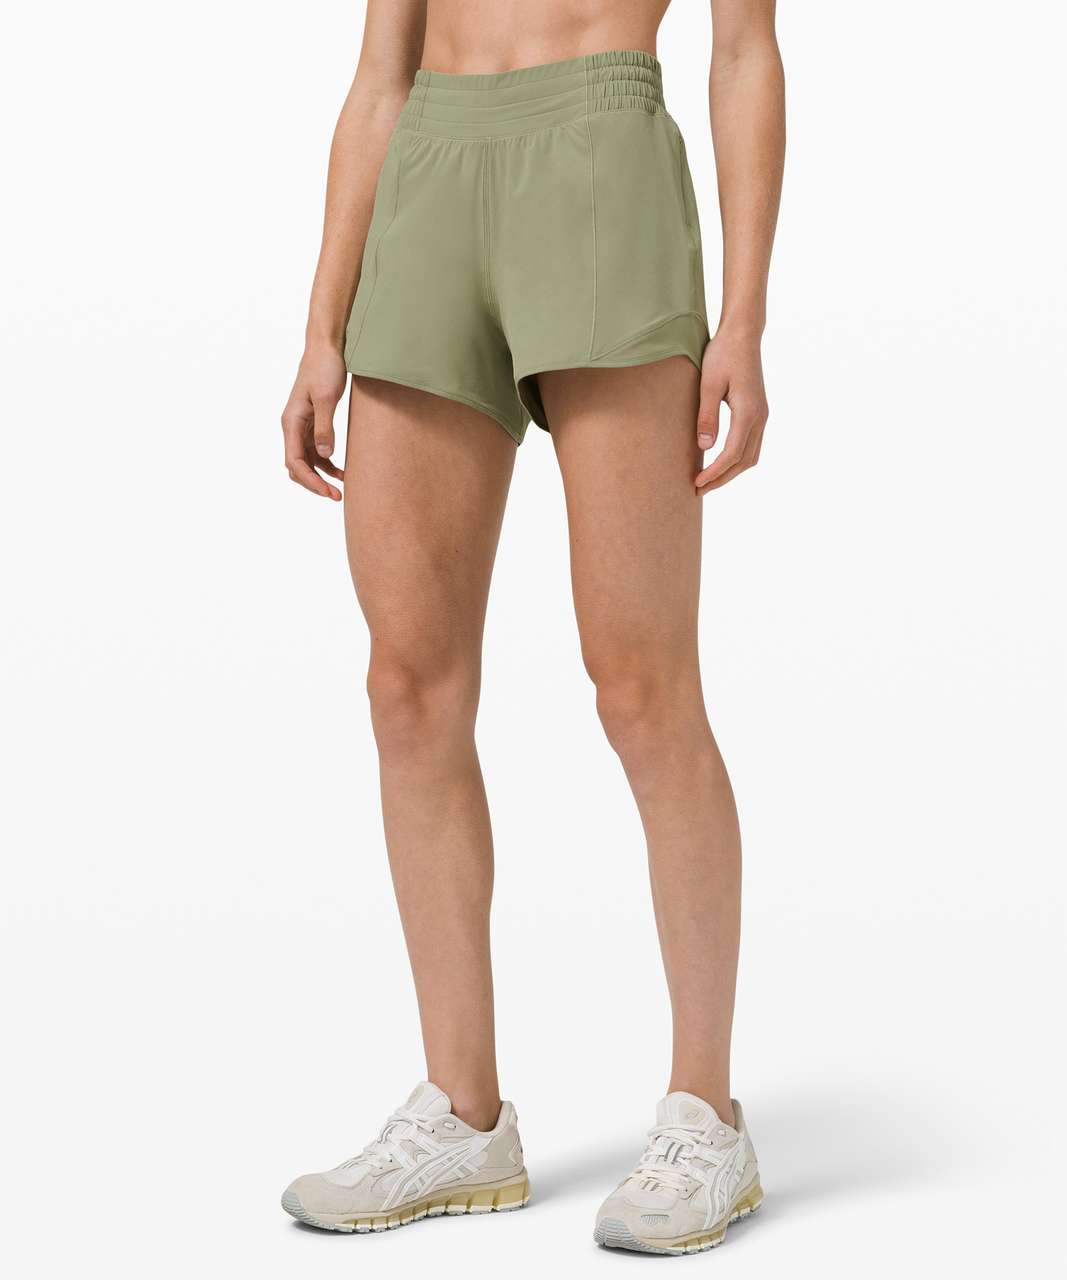 Lululemon 🍋 Kelly Green Hotty Hot Shorts in High Rise 2.5”. Size